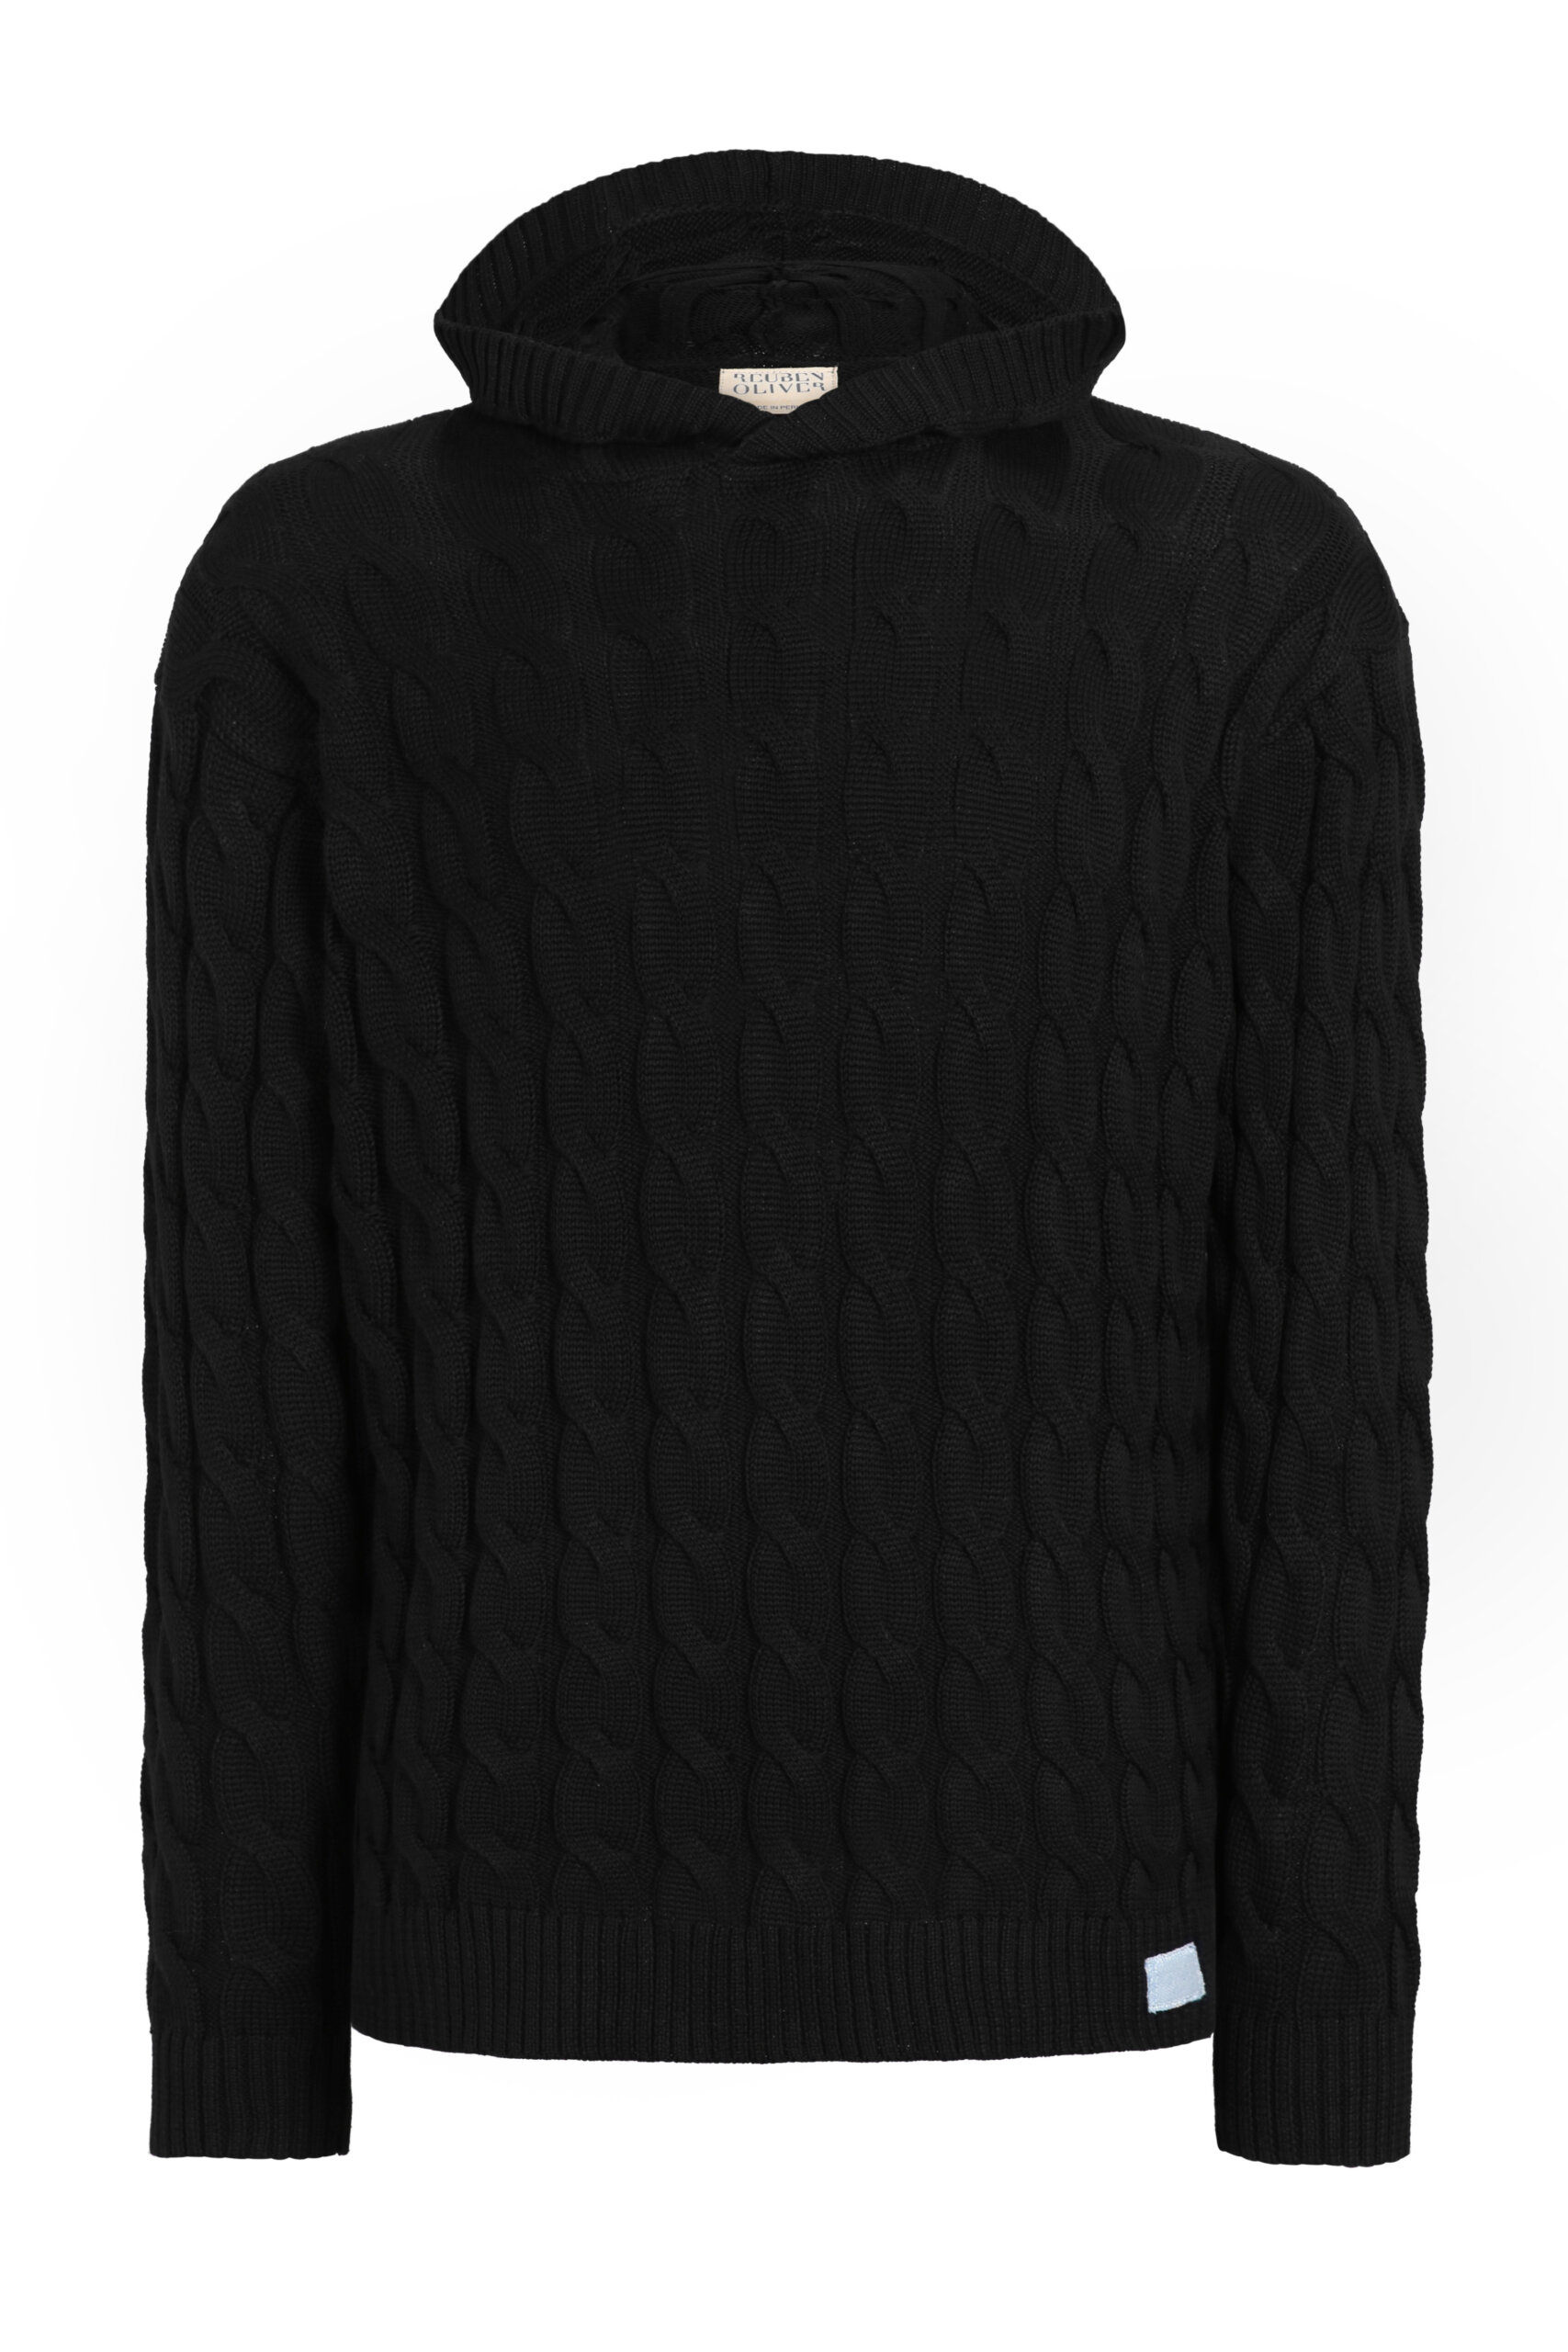 Men's Black Cable Knit Hoodie Small Reuben Oliver